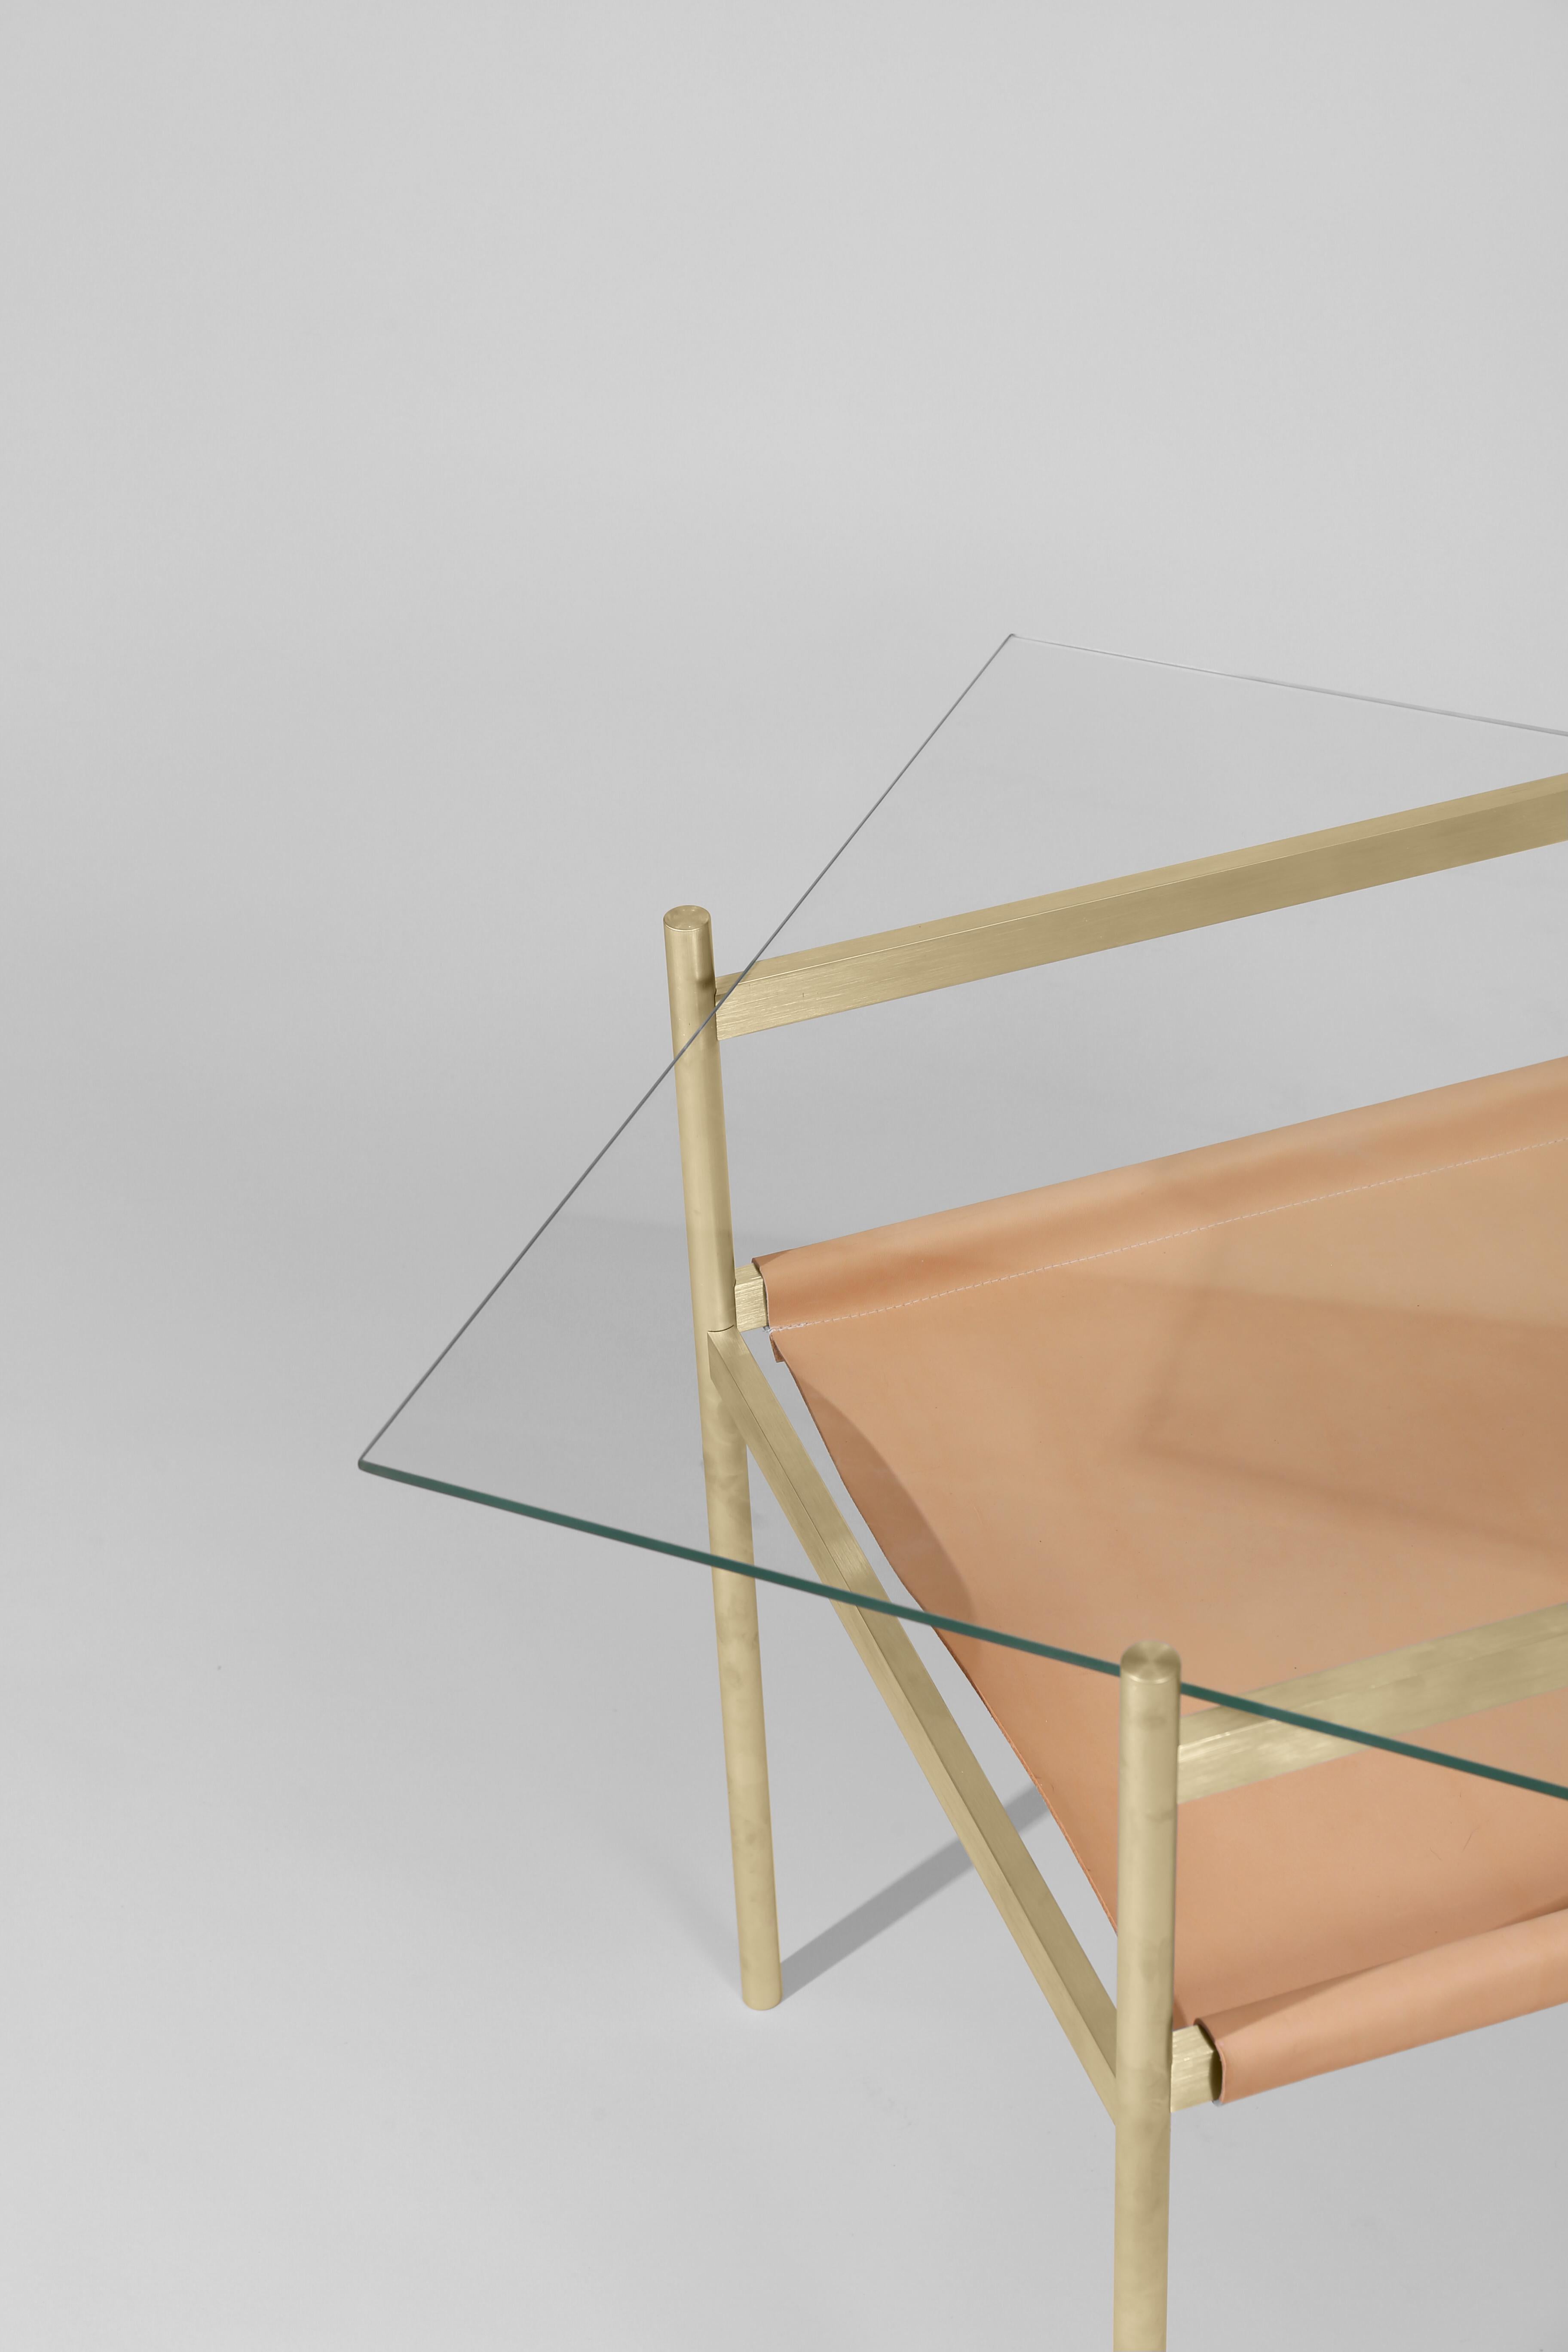 Made to order. Please allow six weeks for production.

Brass frame / Clear glass / Natural leather sling

The Duotone Furniture series is based on a modular hardware system that pairs sturdy construction with visual lightness and a range of